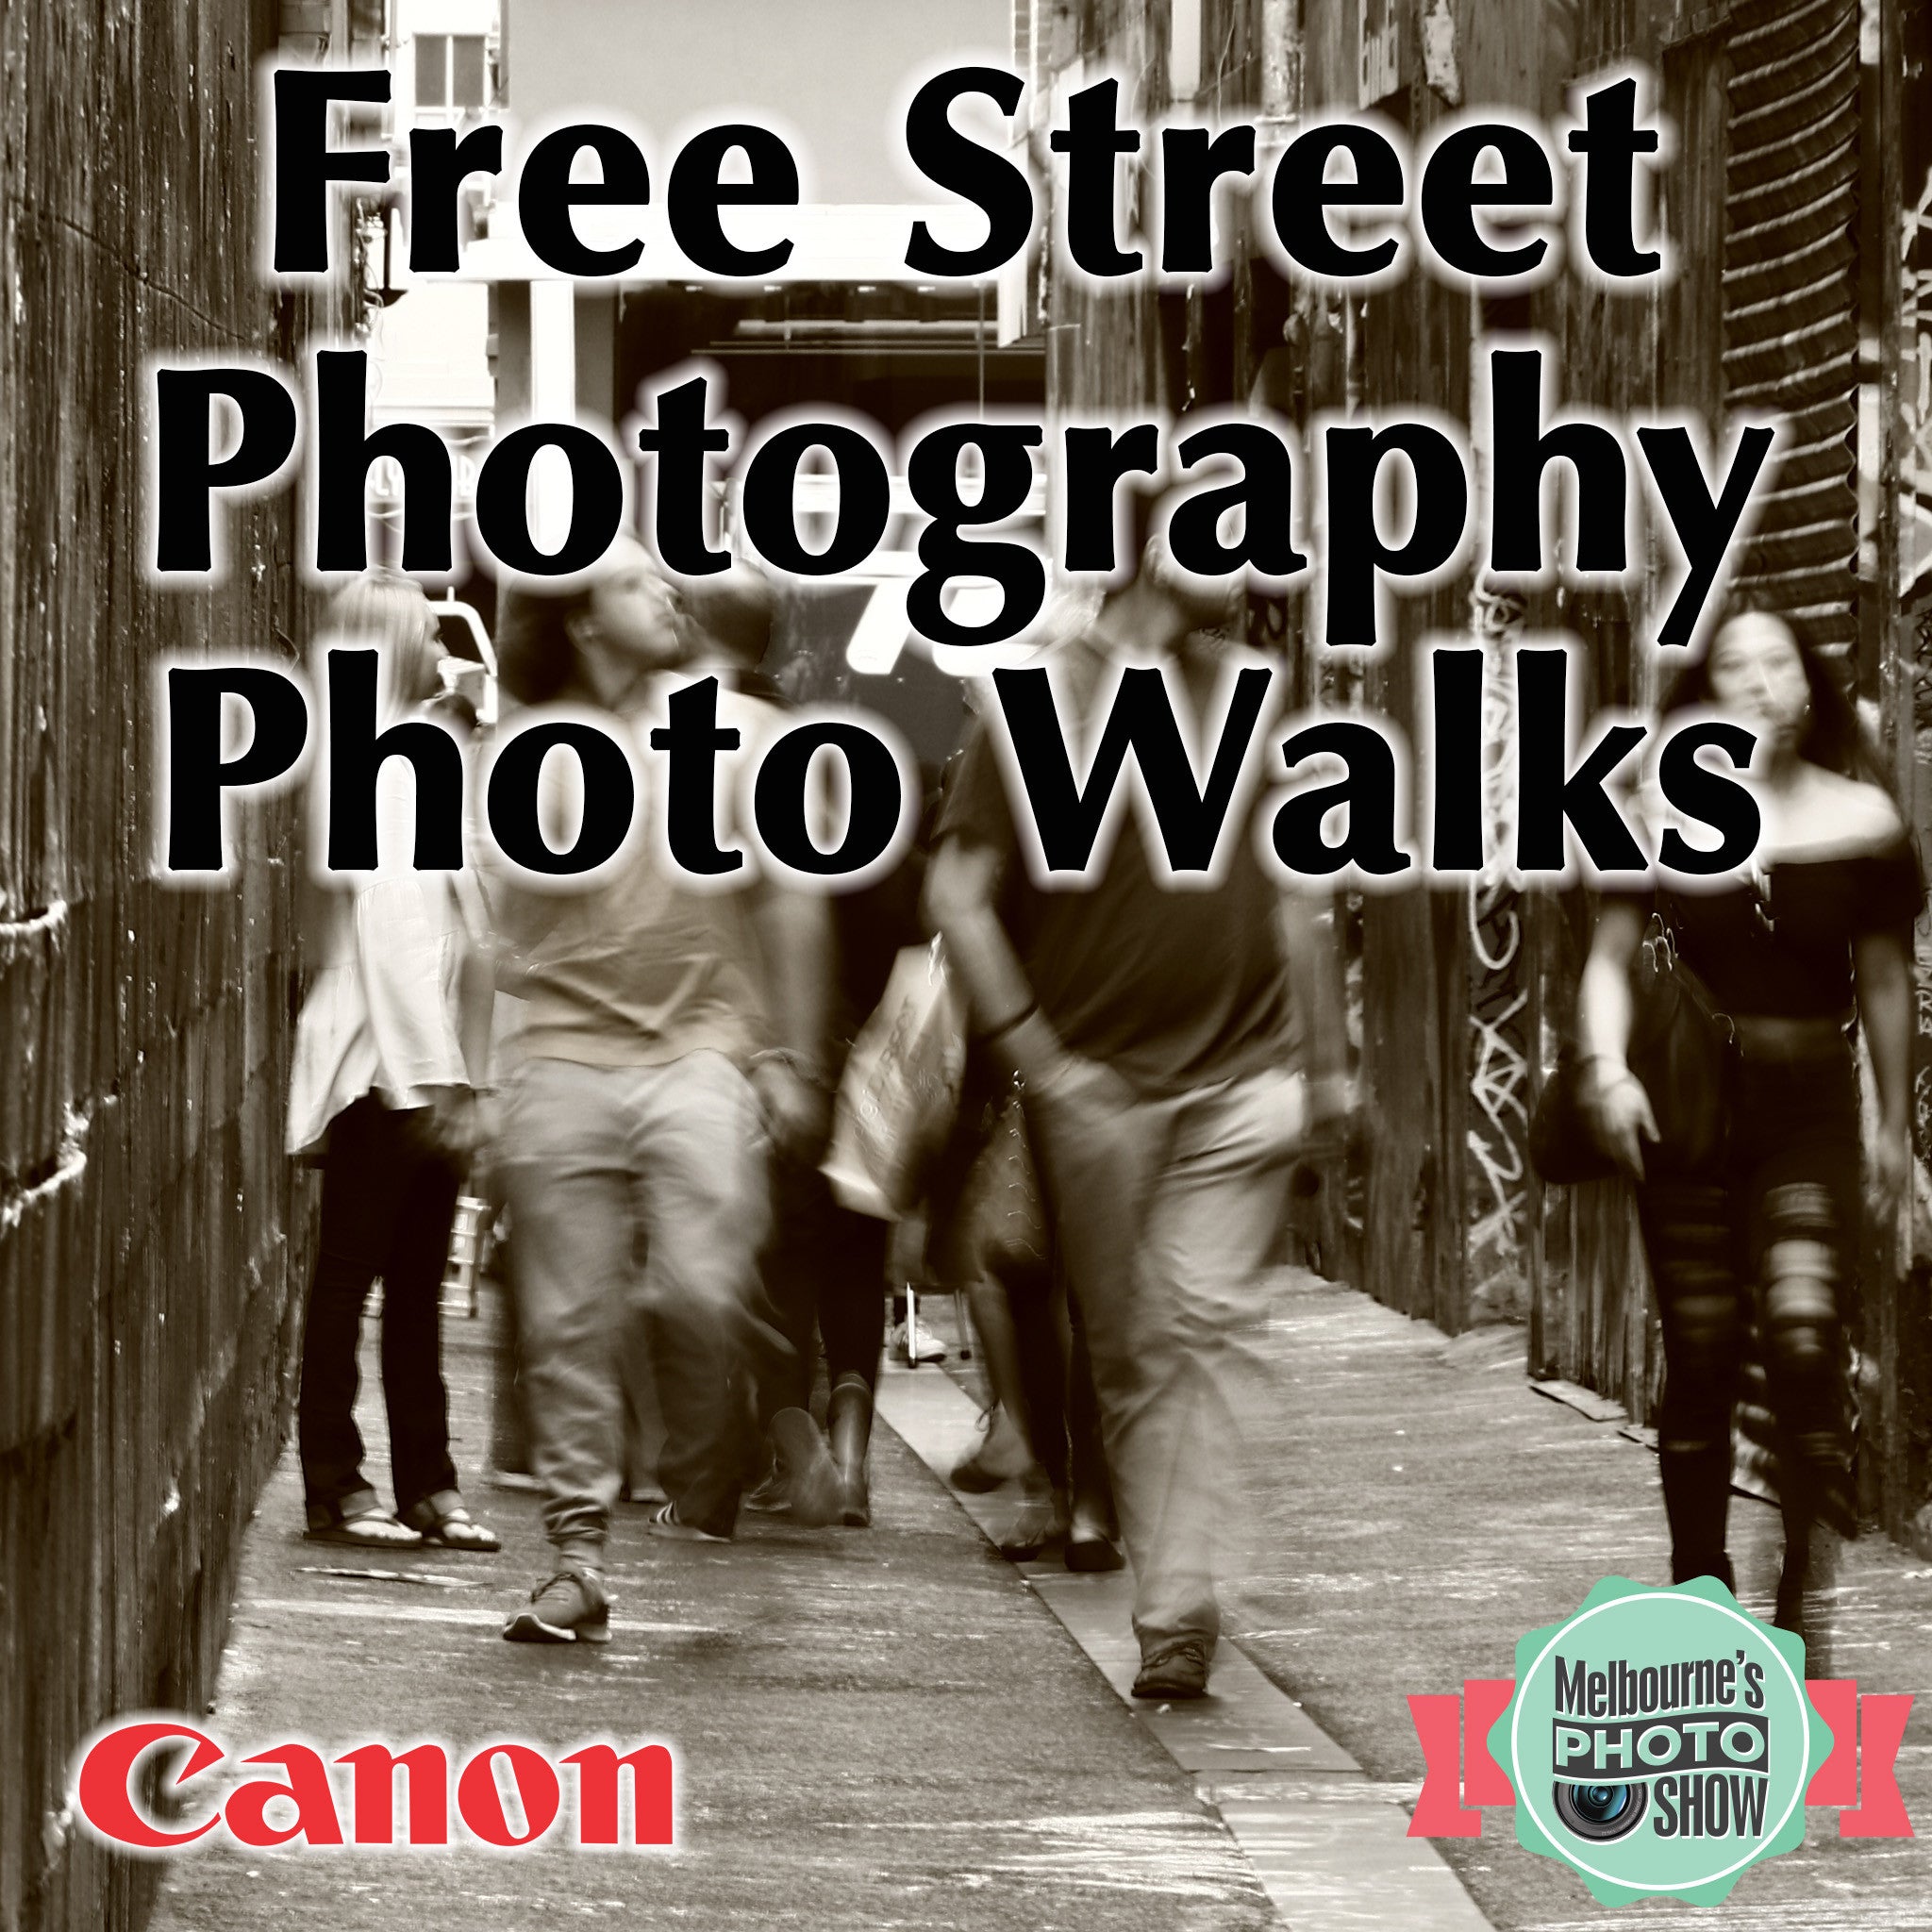 Free Canon Street Photography Photo Walks at 11am, 1pm and 3pm - Saturday 8th April